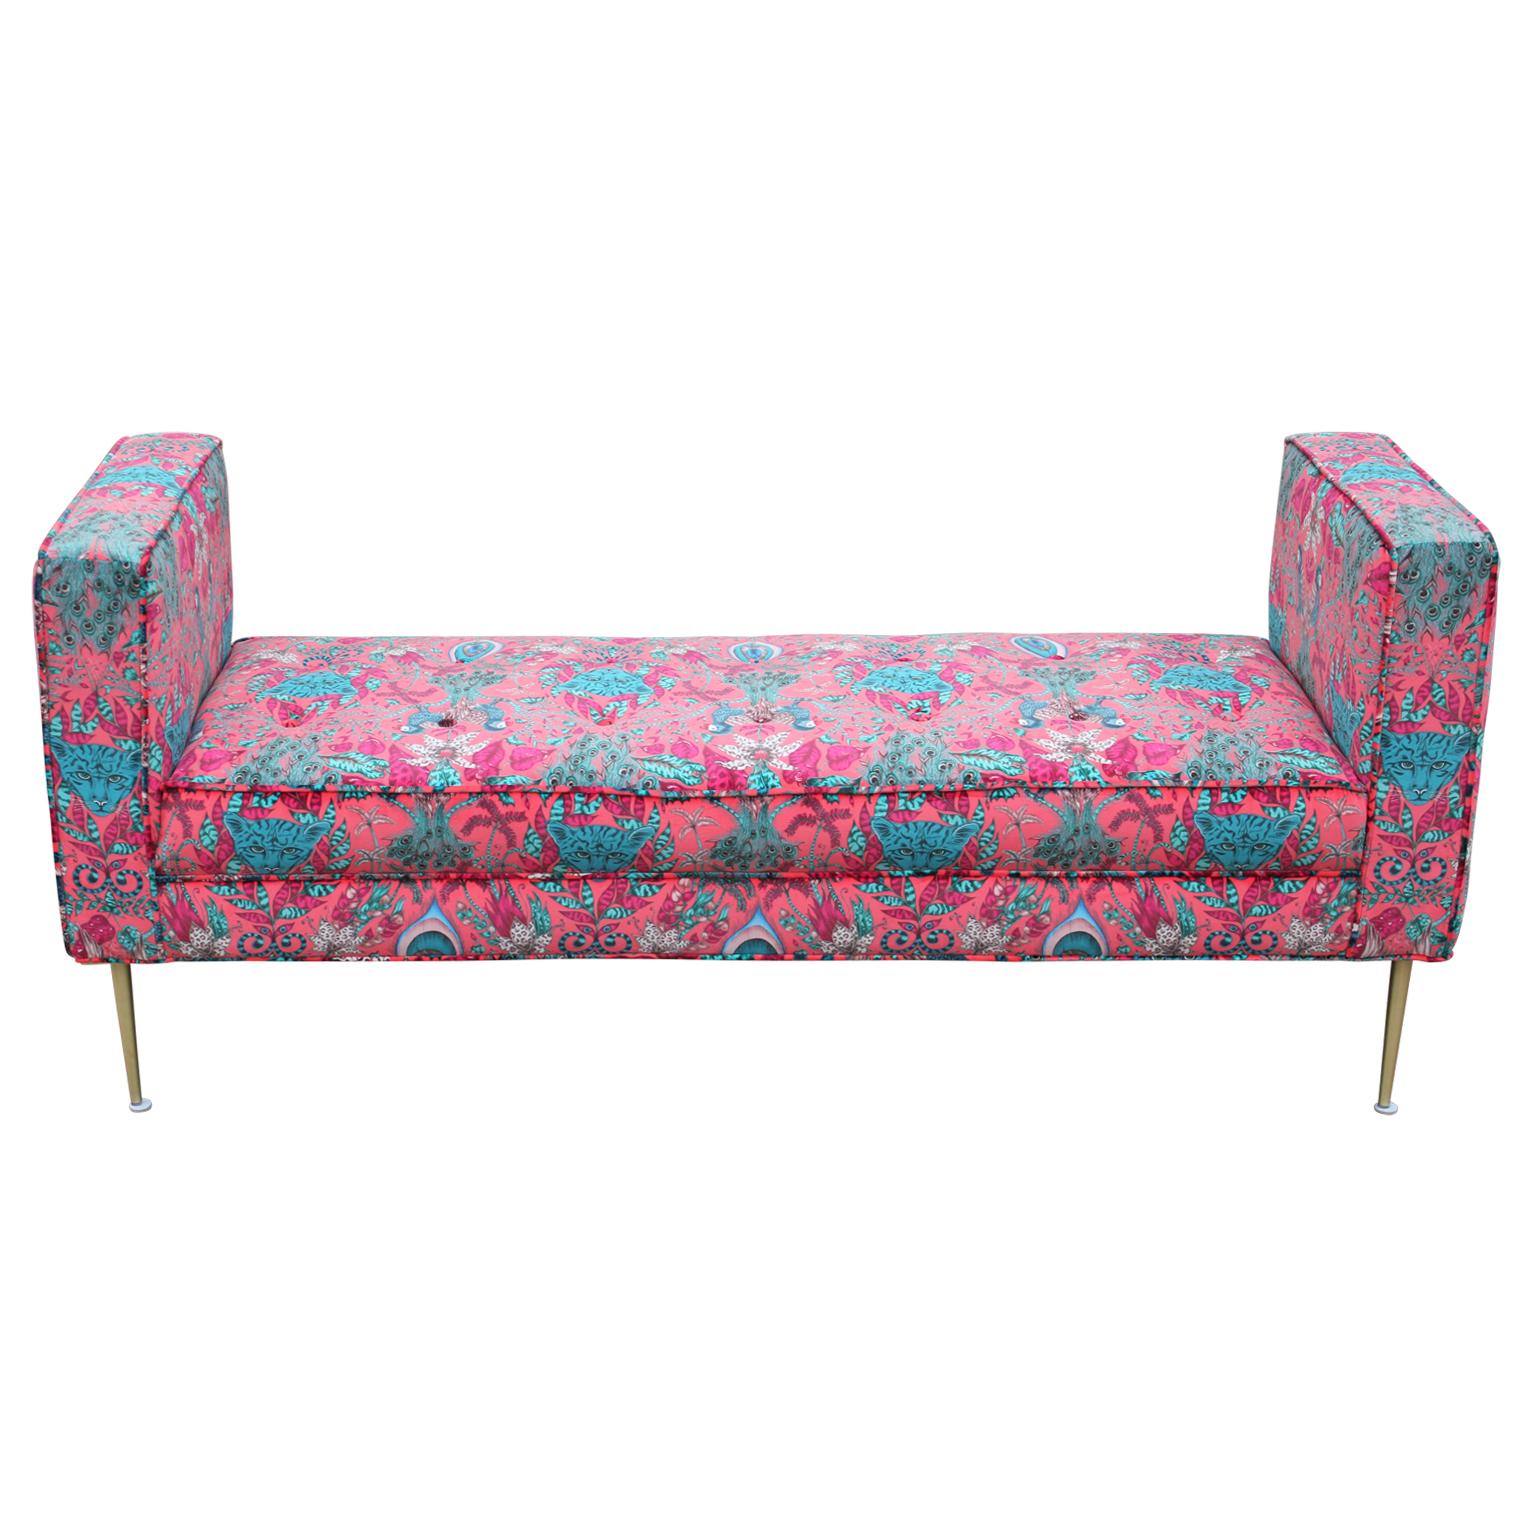 Beautiful Reeves design pink and turquoise custom tiger velvet bench with brushed brass legs. Fabric is soft and plush to the touch.

We can customize the size and dimensions for you.